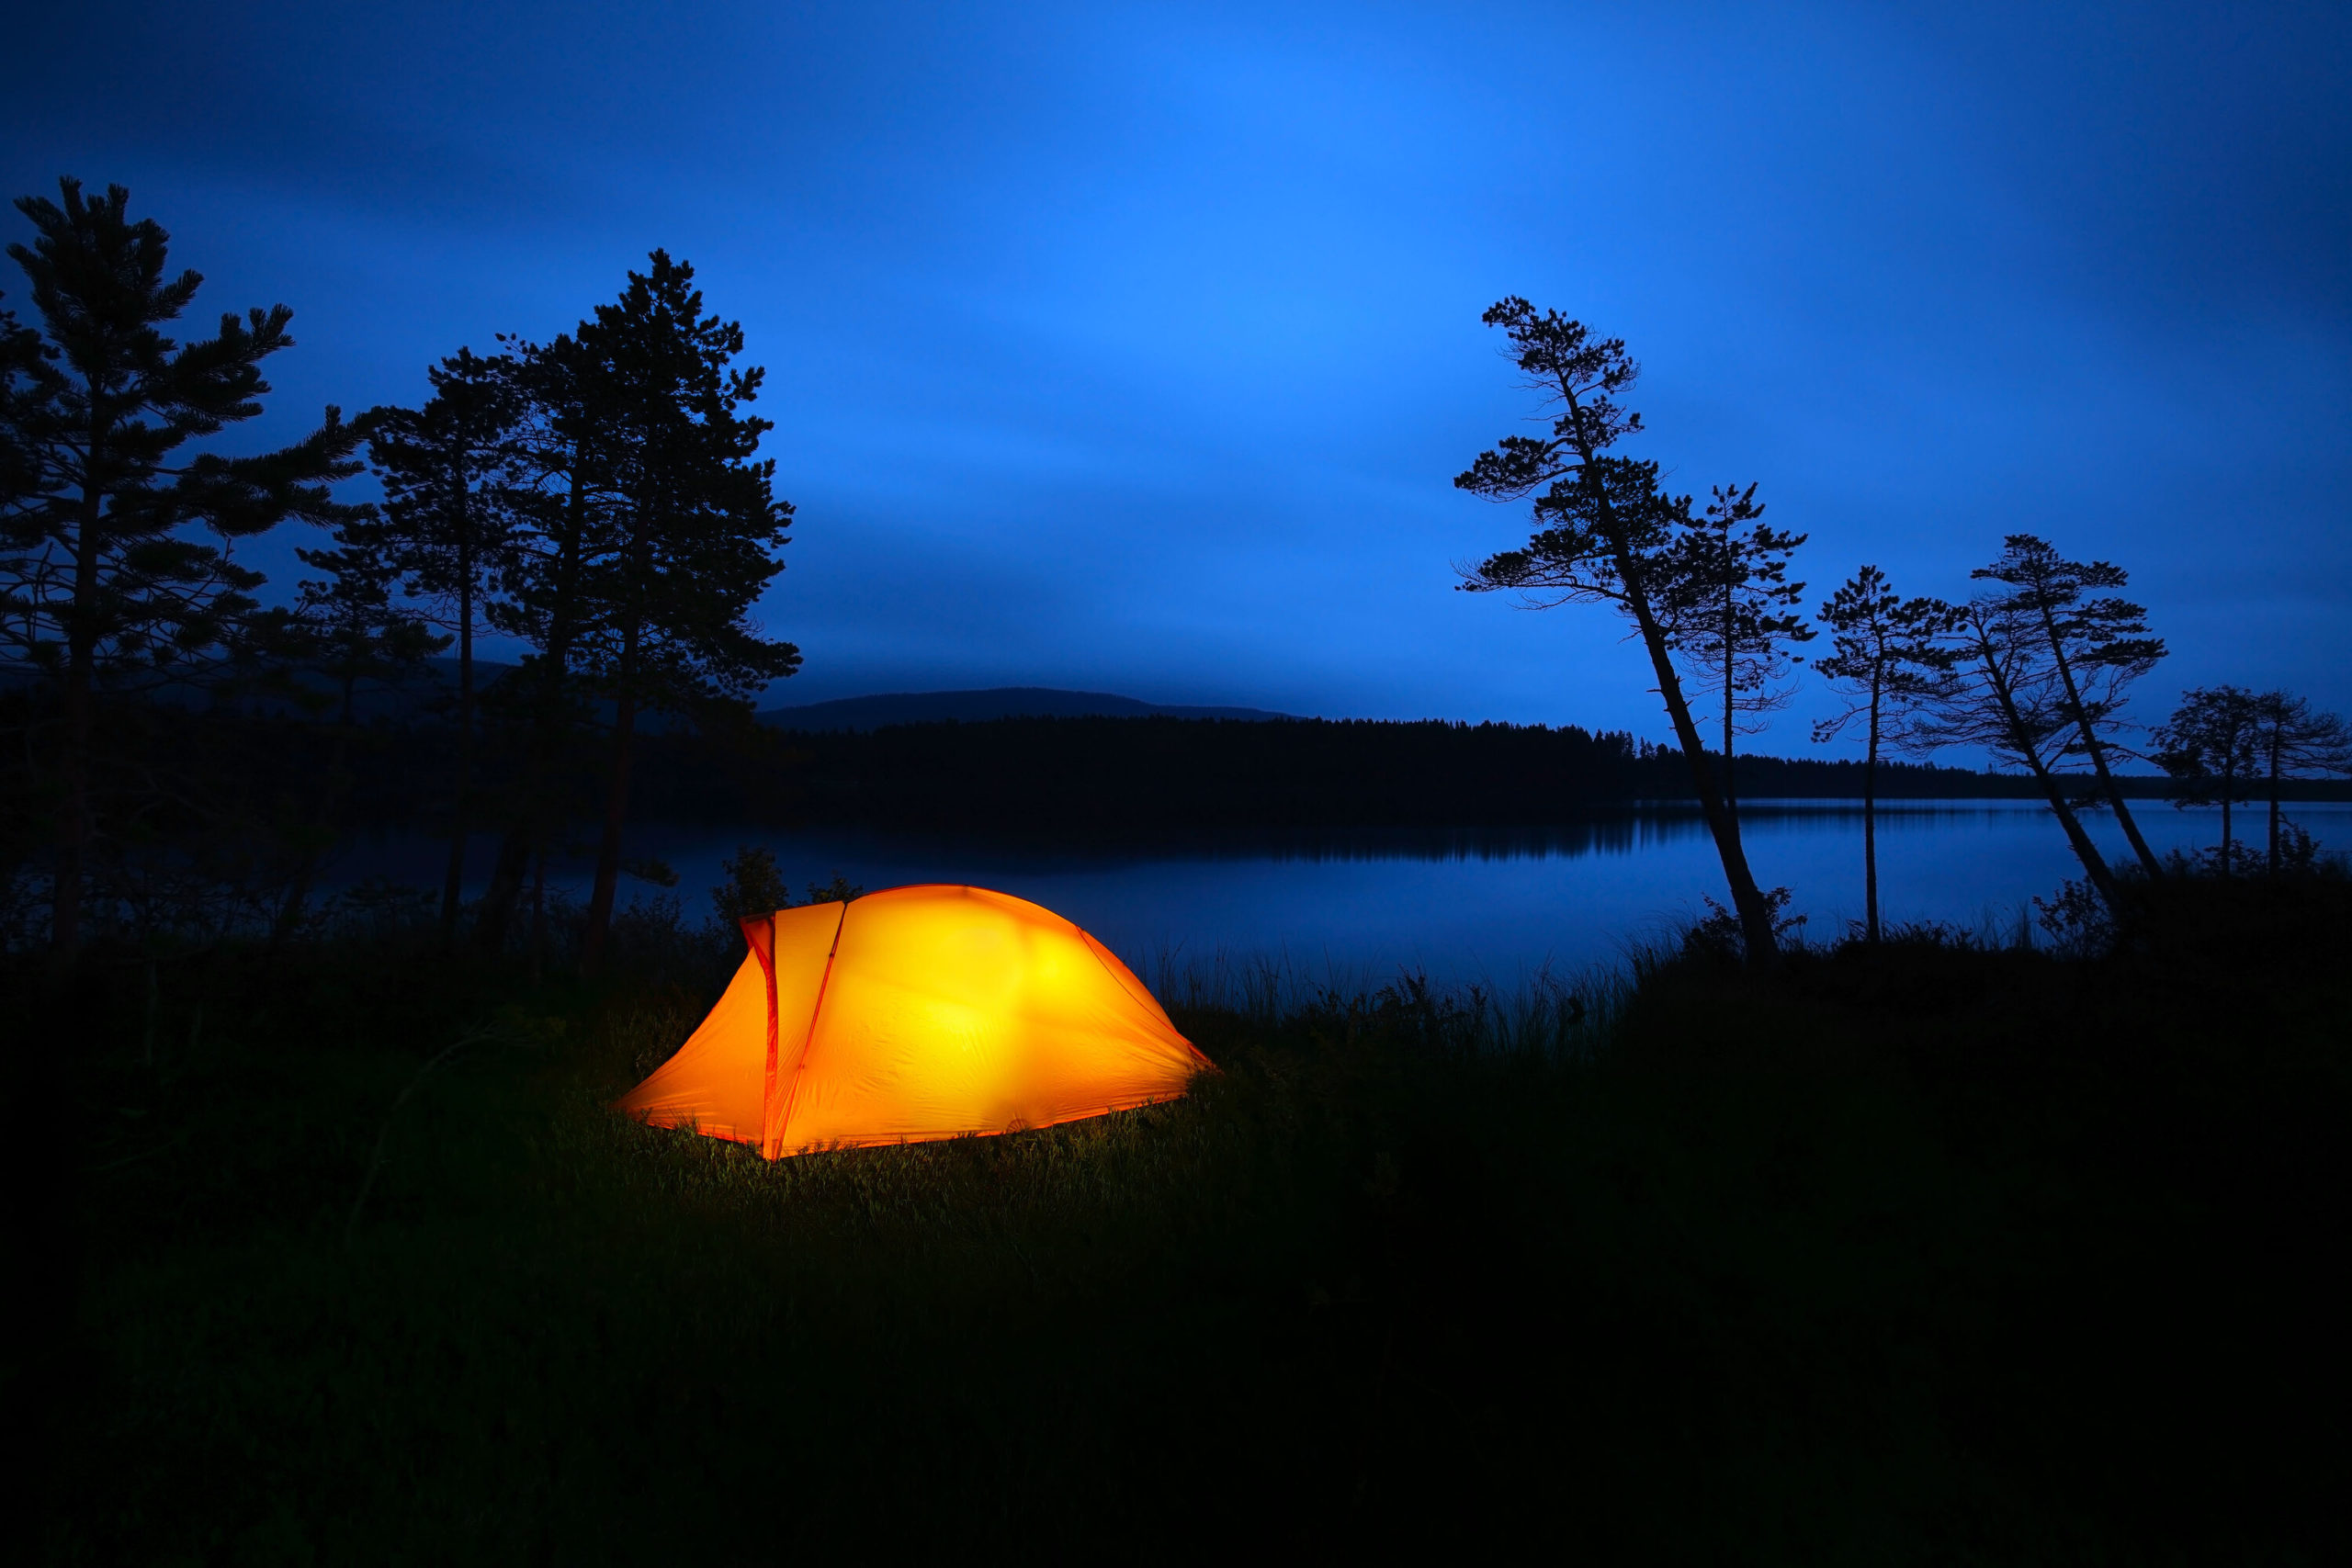 Camping rules at Provincial Parks change